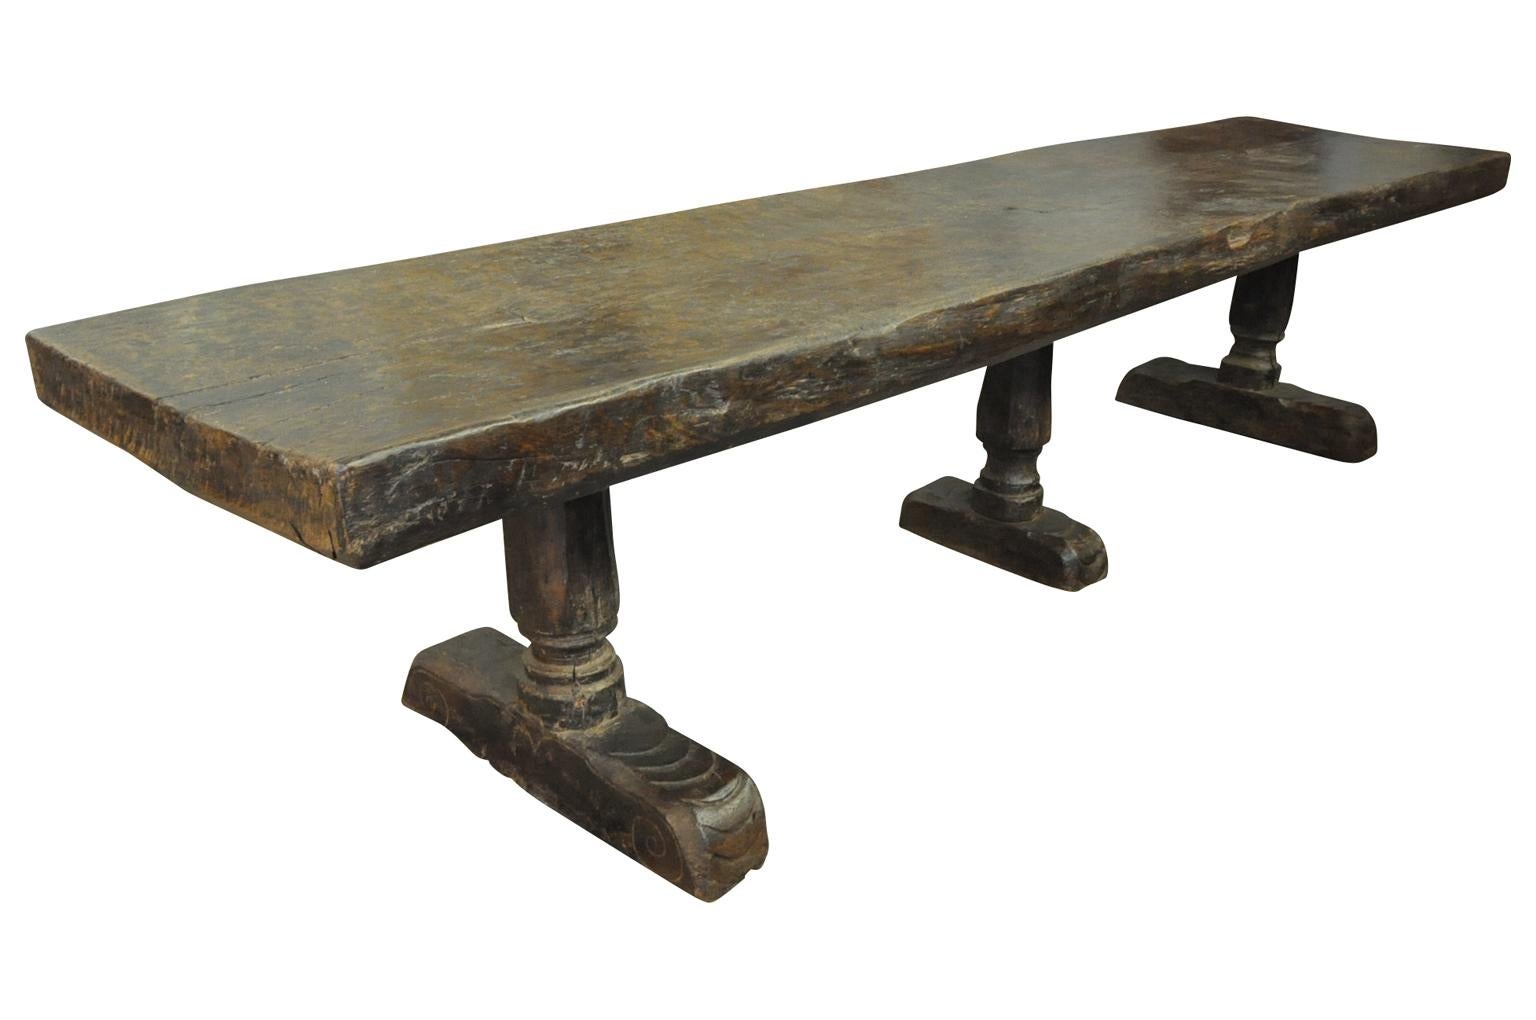 Oak Monumental and Very Rare Pair of 16th Century Spanish Castle Tables For Sale